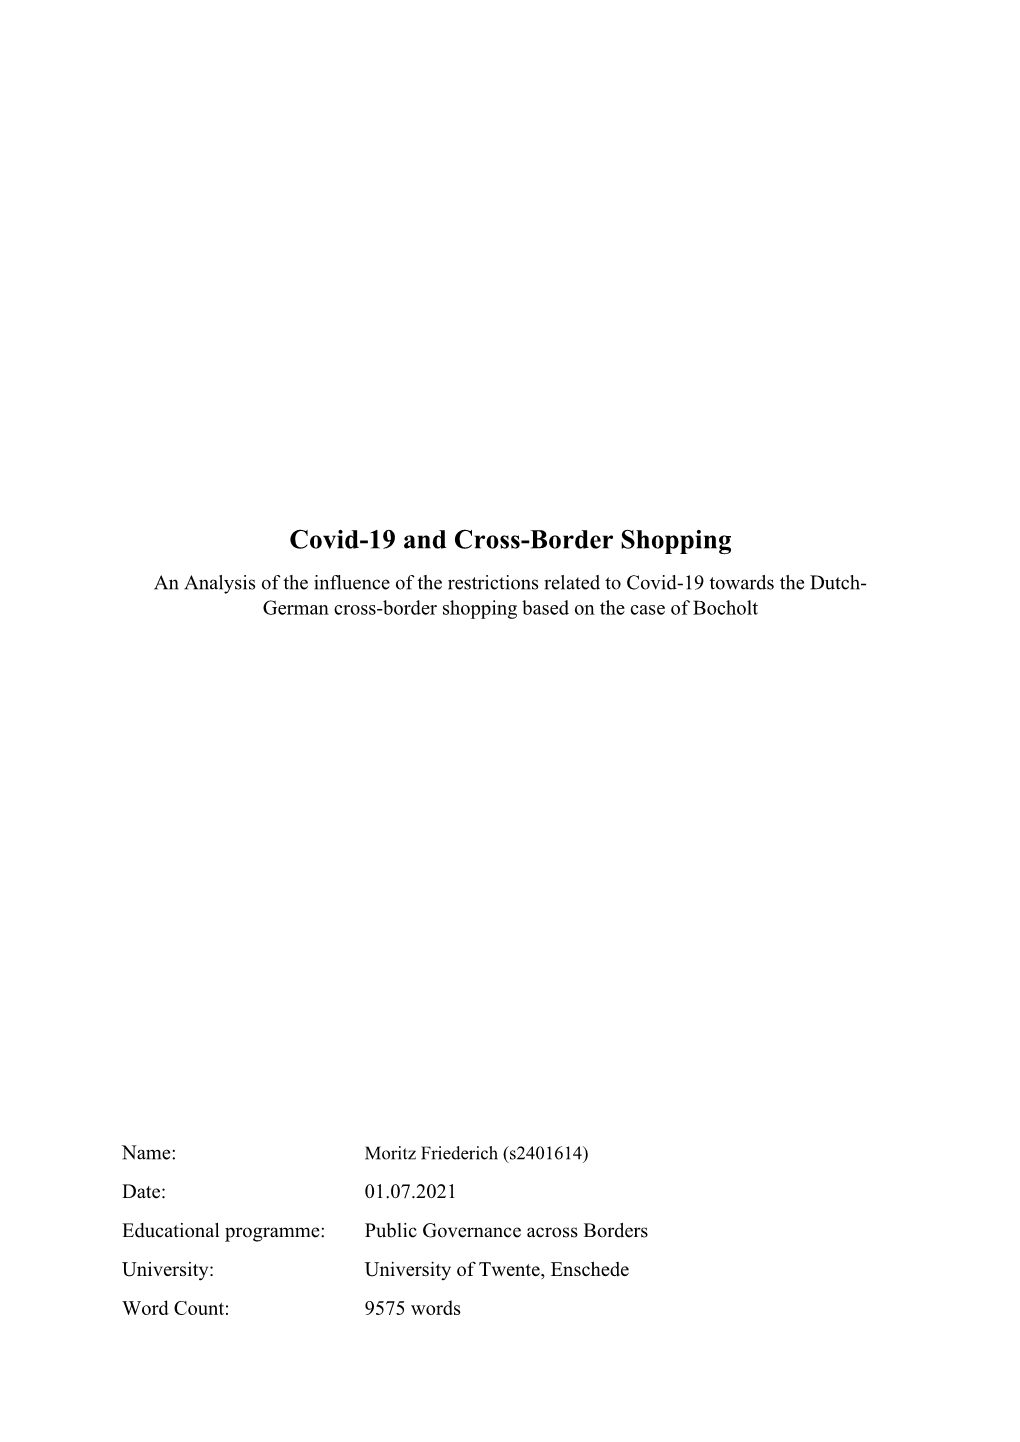 Covid-19 and Cross-Border Shopping